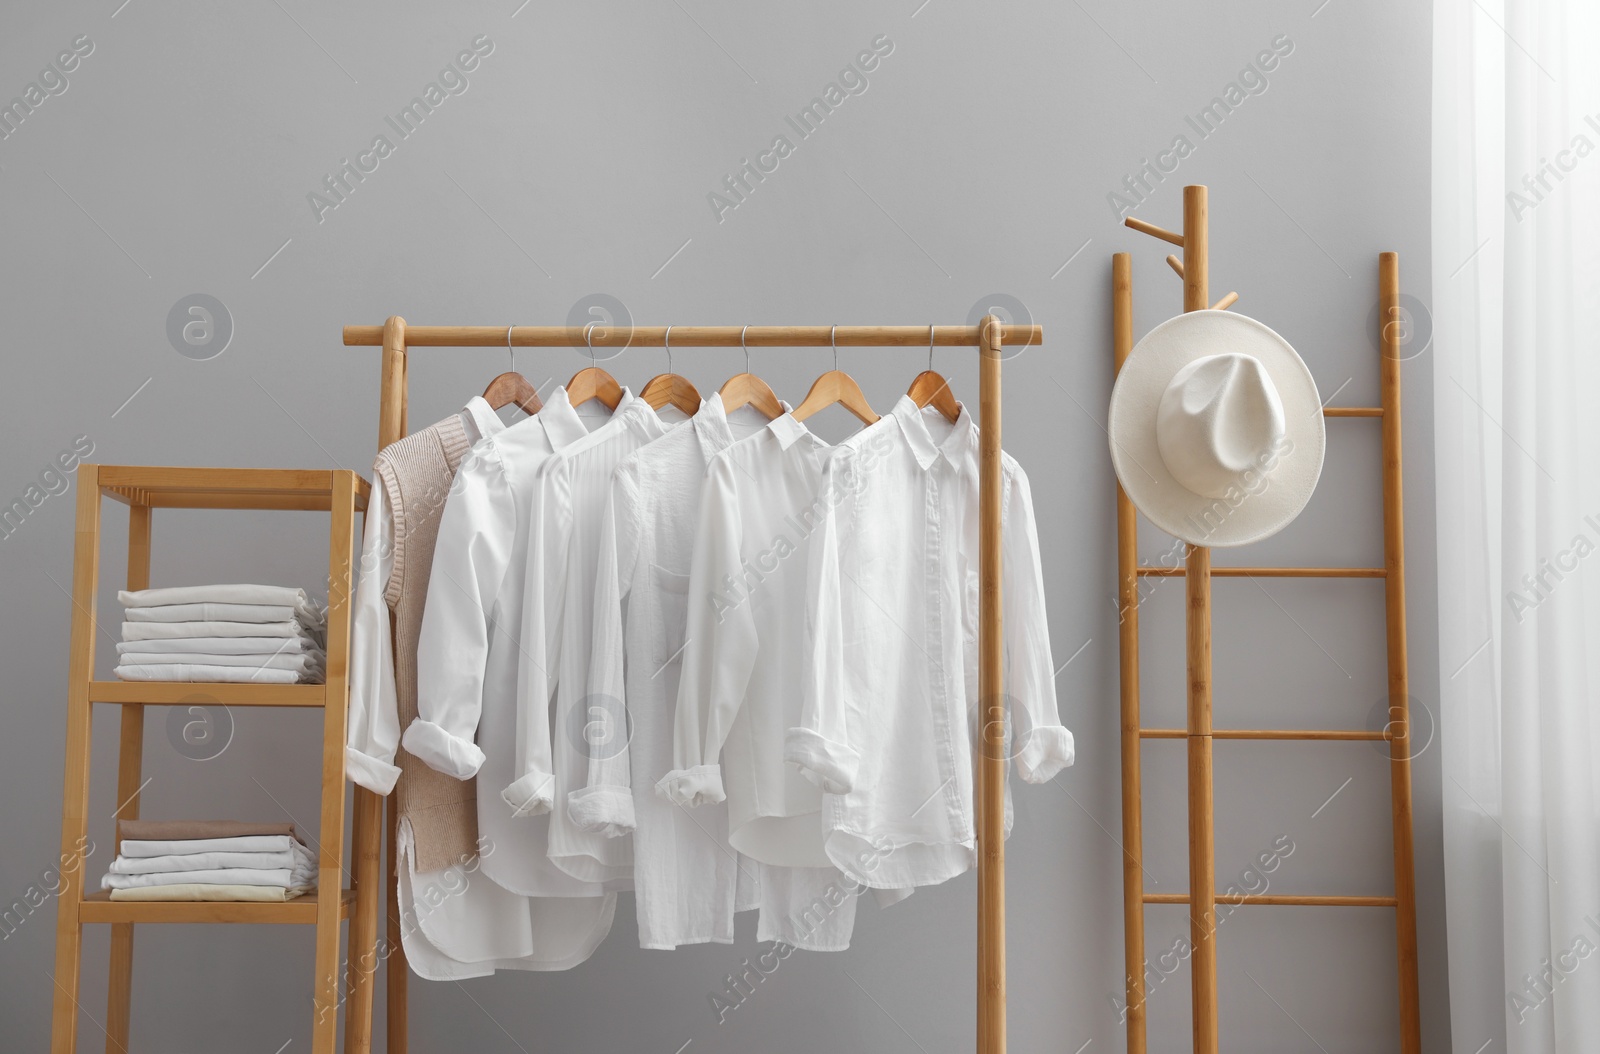 Photo of Wardrobe organization. Rack with different stylish clothes, hat, ladder and shelving unit near grey wall